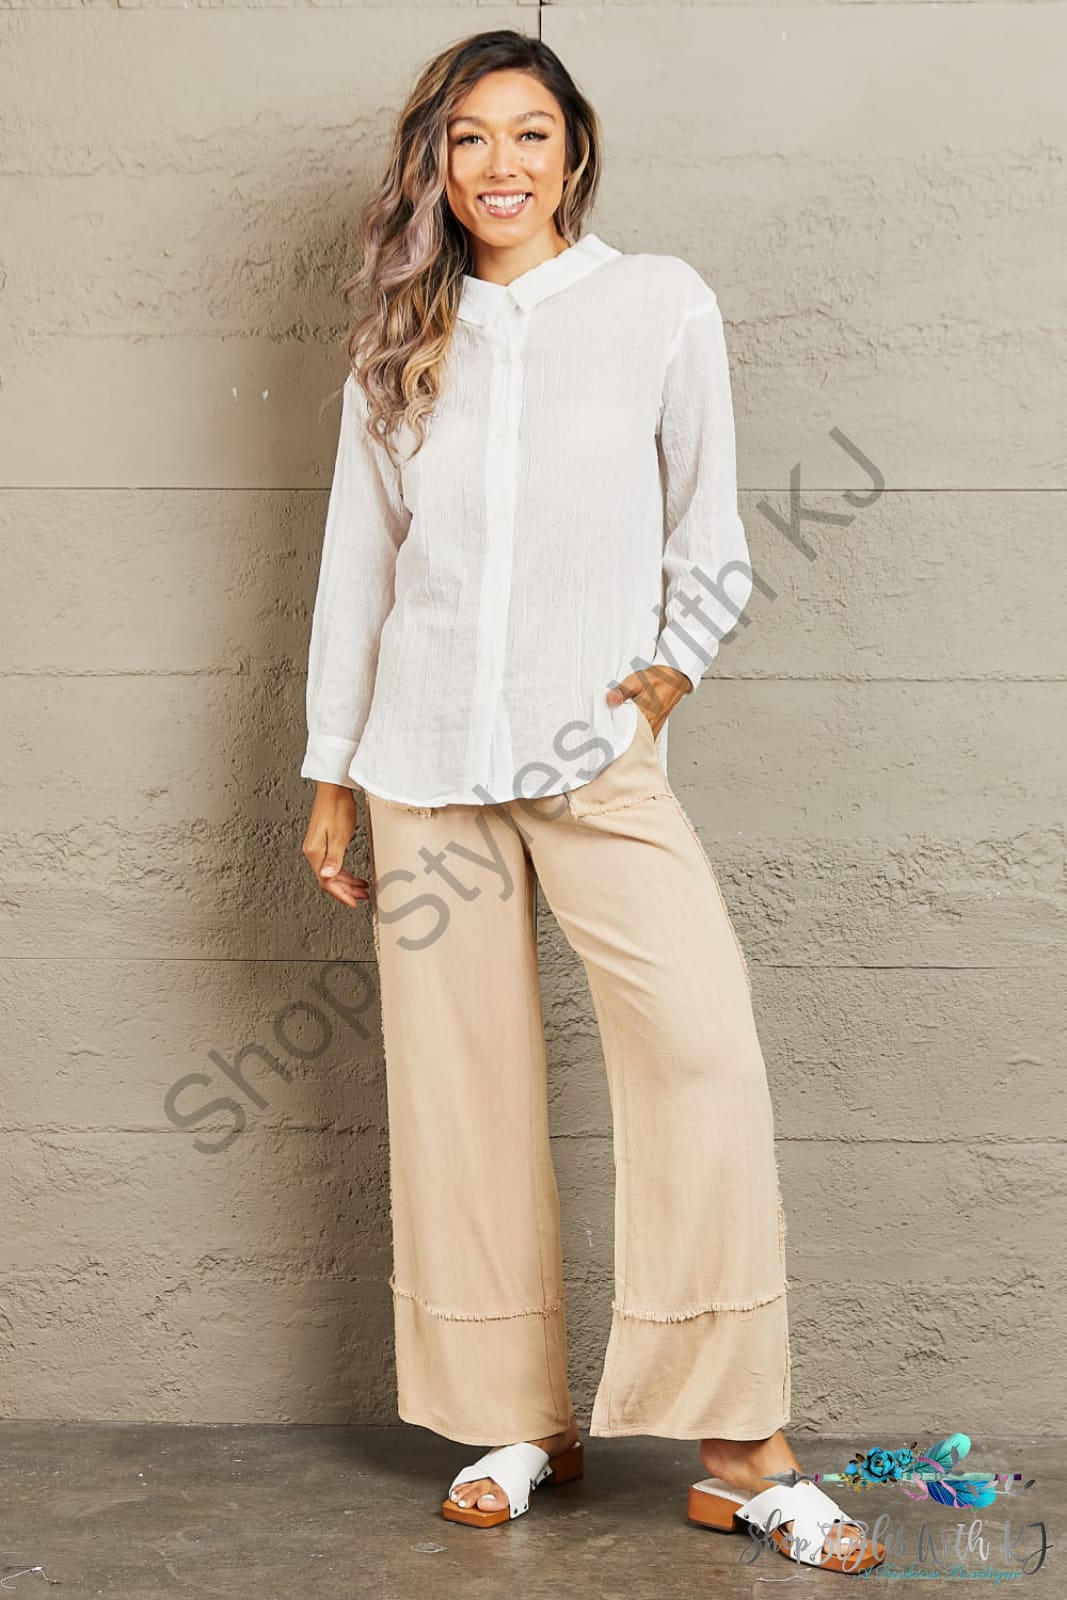 Petal Dew Take Me Out Lightweight Button Down Top